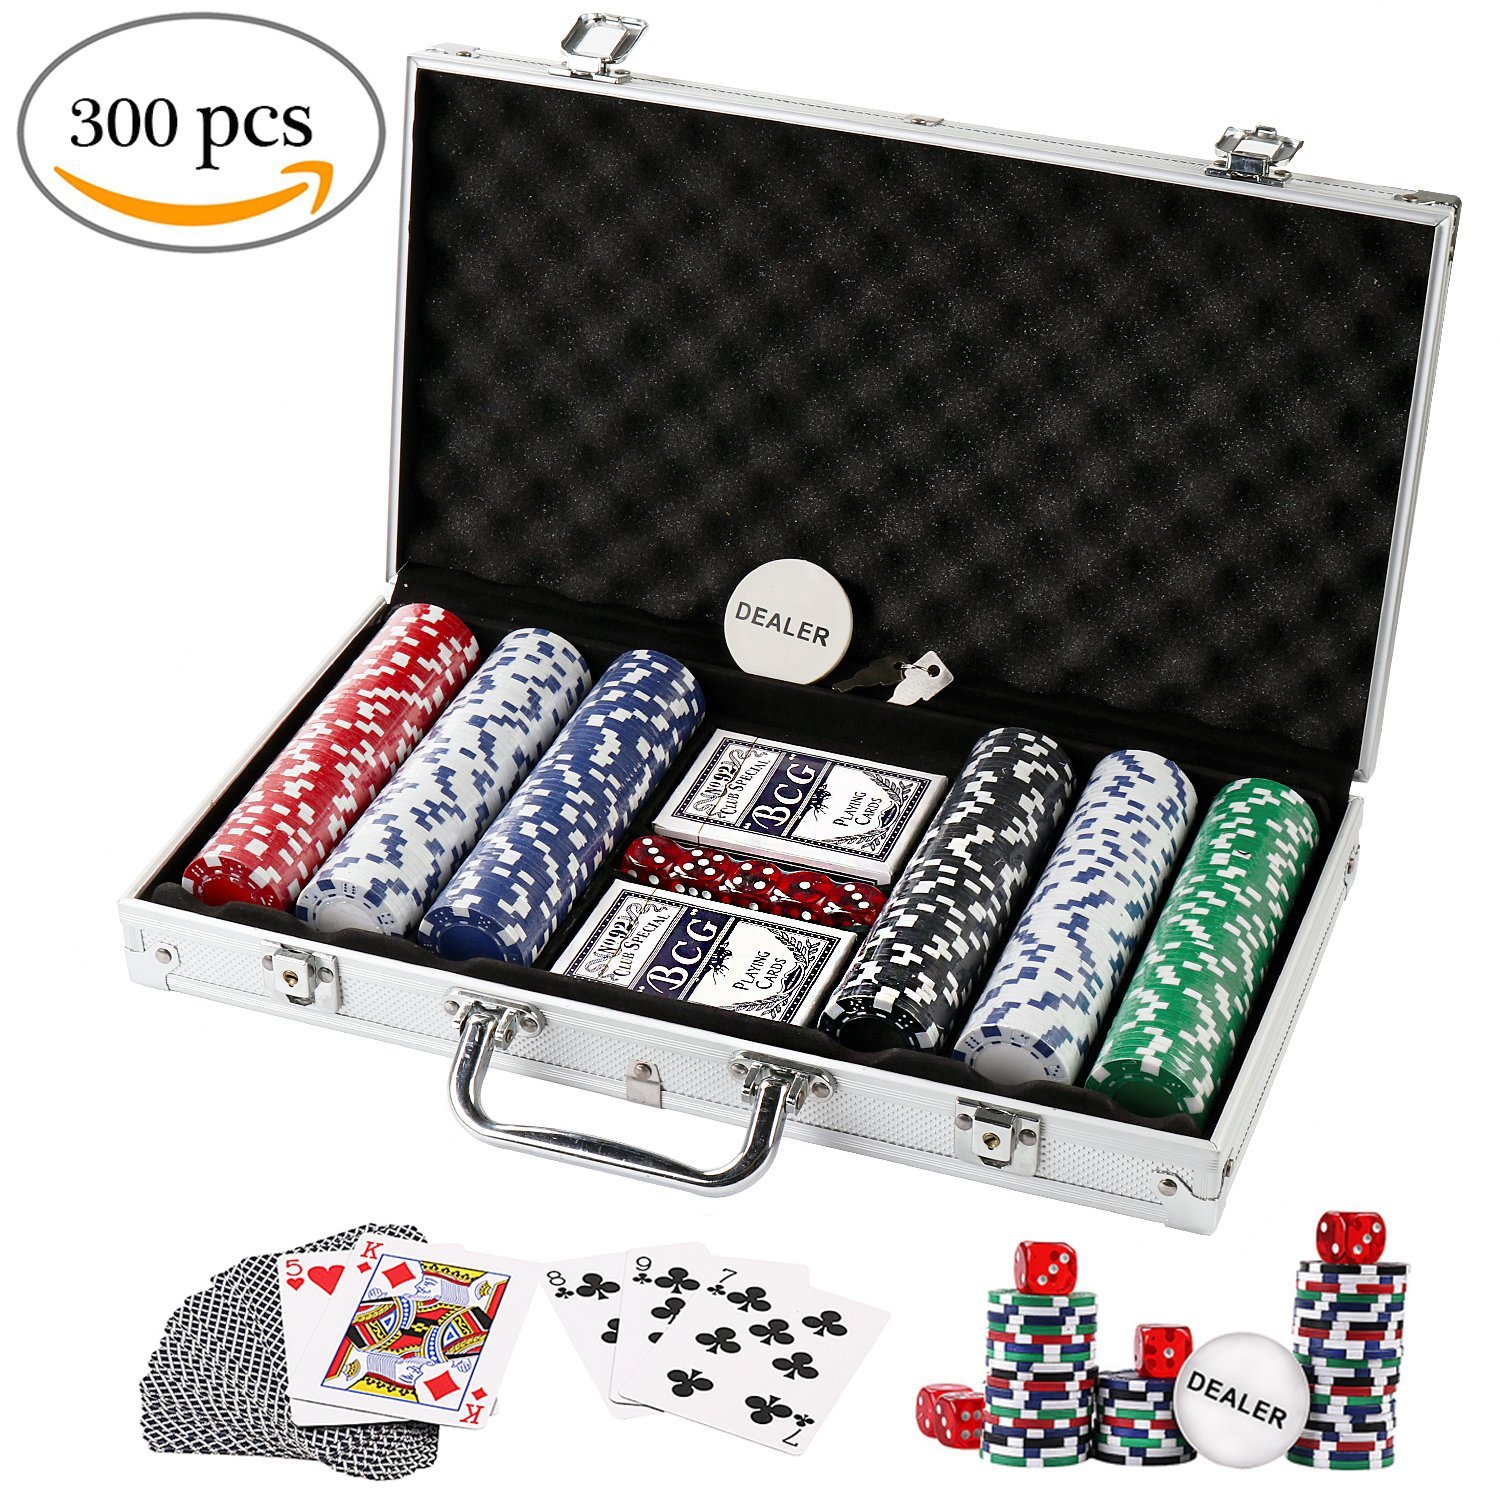 This Texas Holdem 300 clay chip poker set will make you look classy while you take your friend's money. <br/><br/> You can pick this up at  <a href="https://amzn.to/2Kl63zq" target="_blank">Amazon for about $36.99</a>.